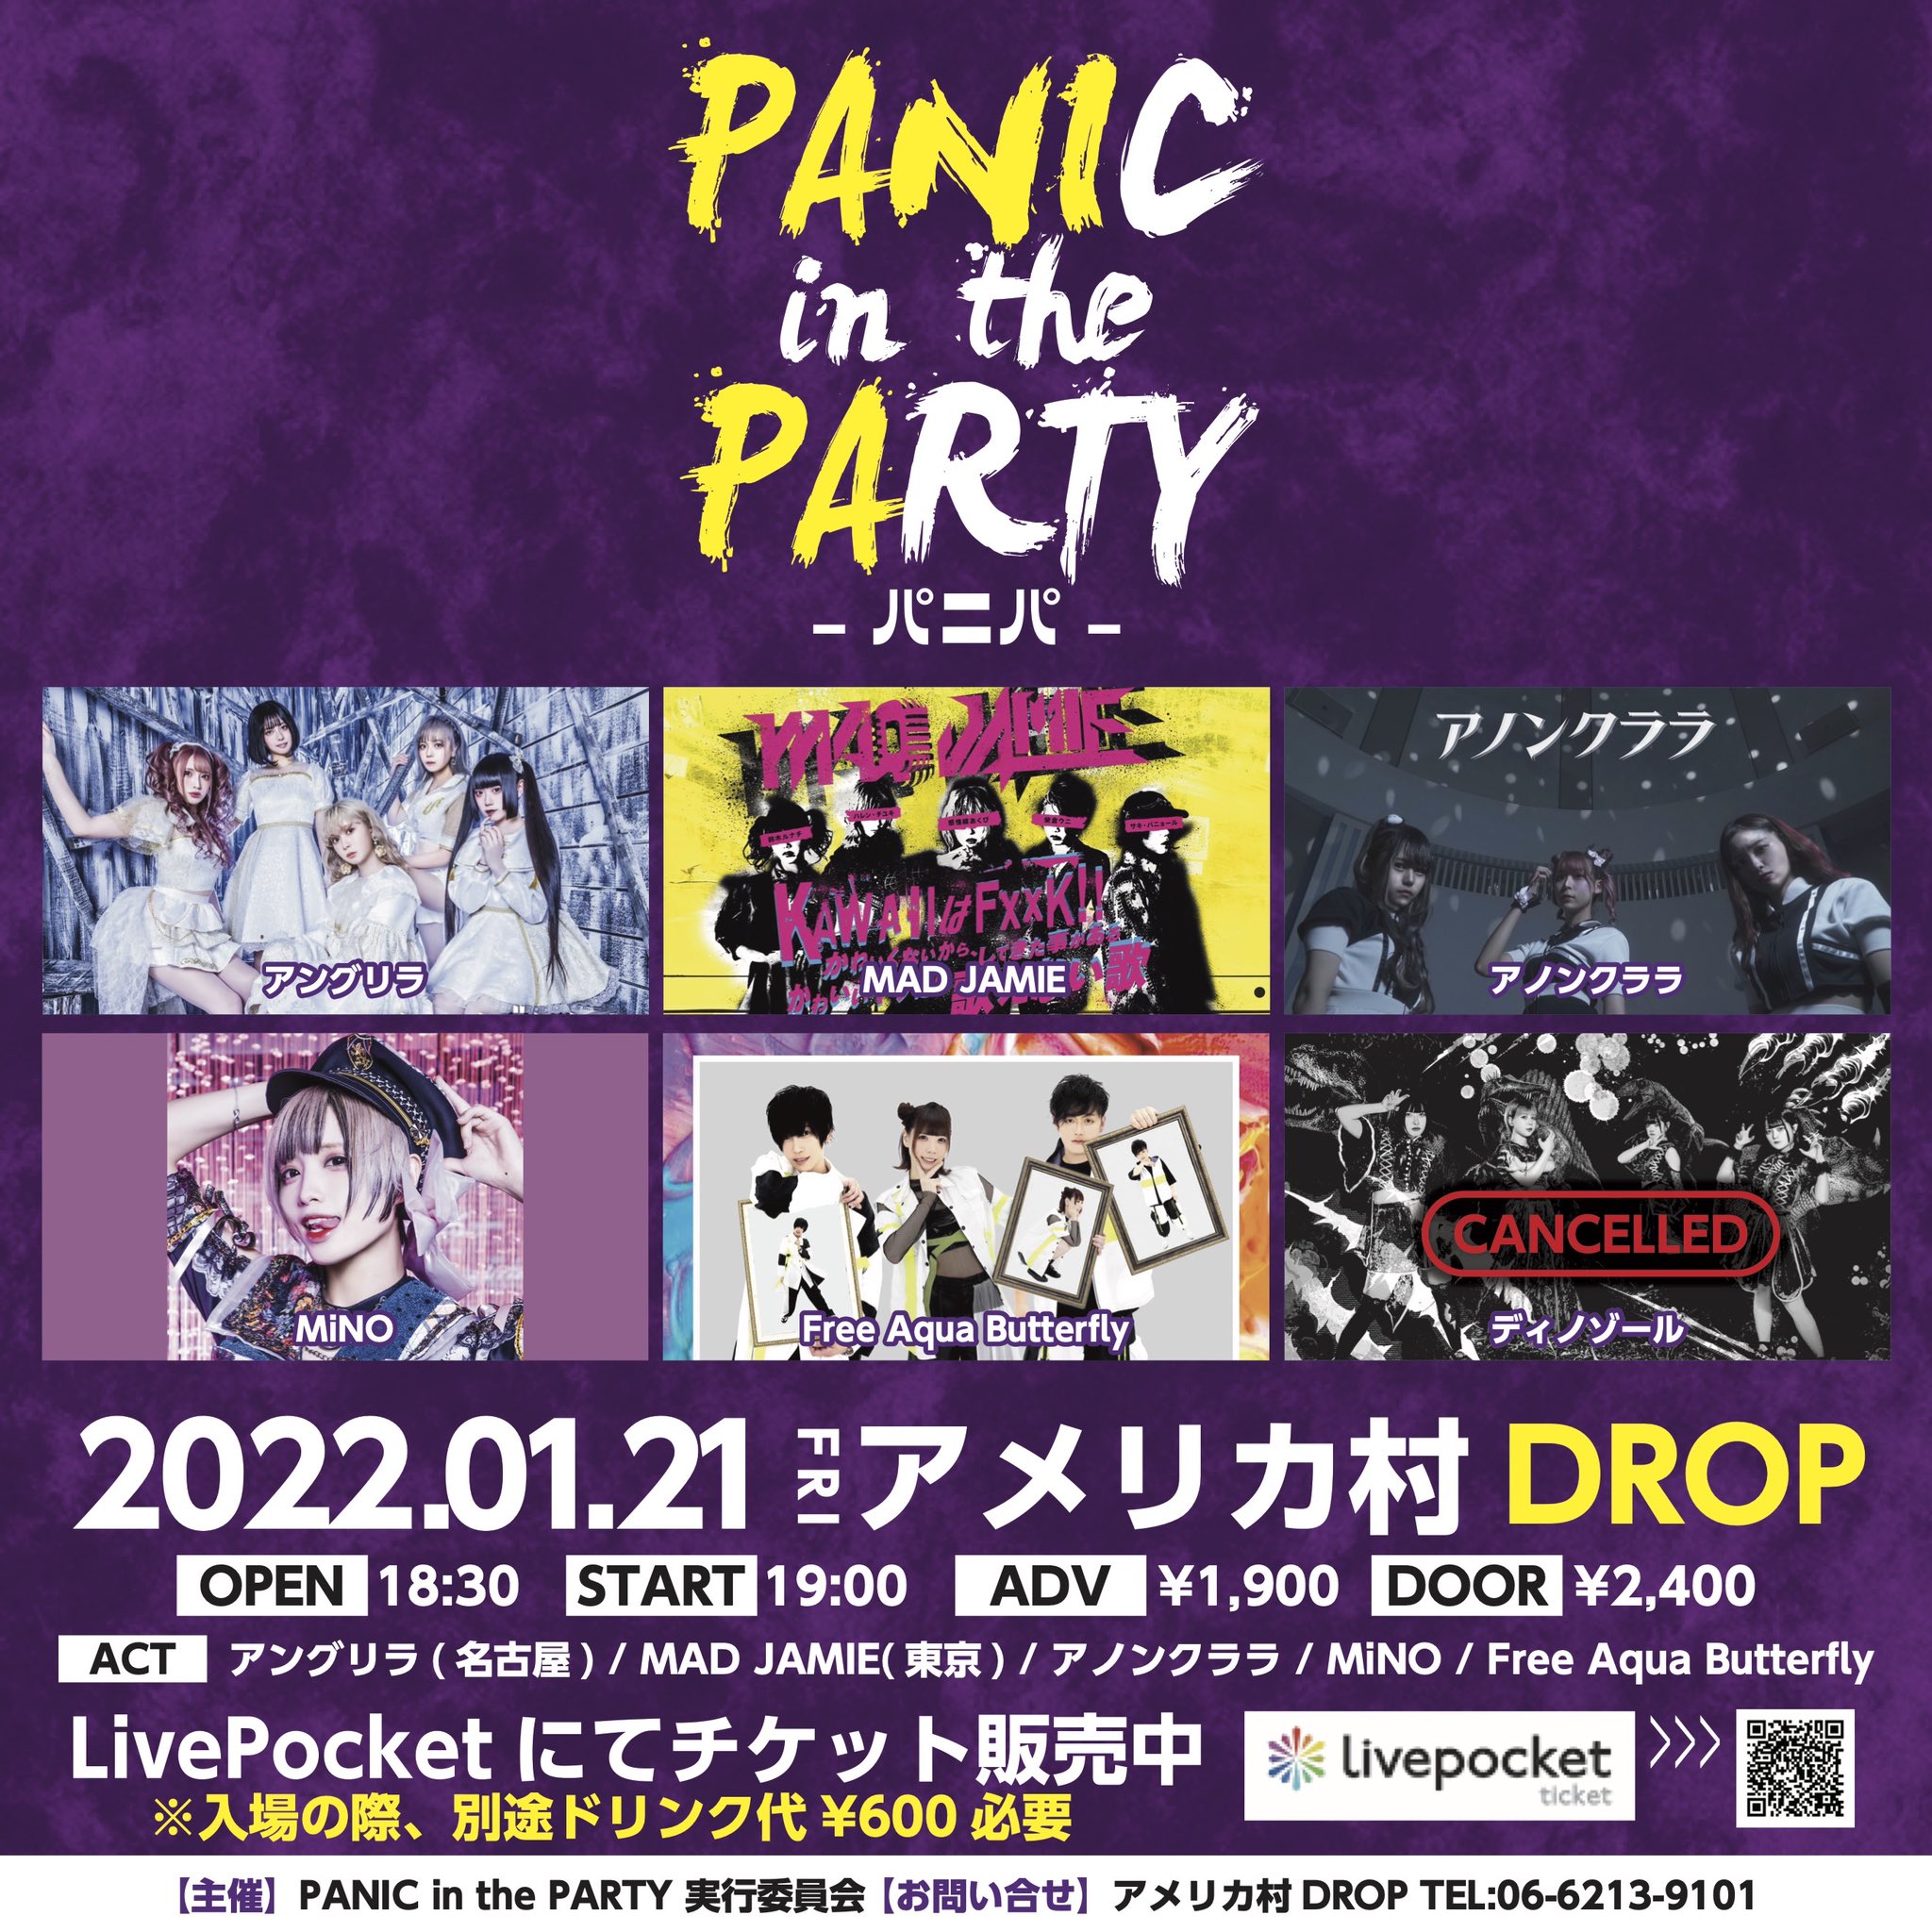 PANIC in the PARTY vo.5